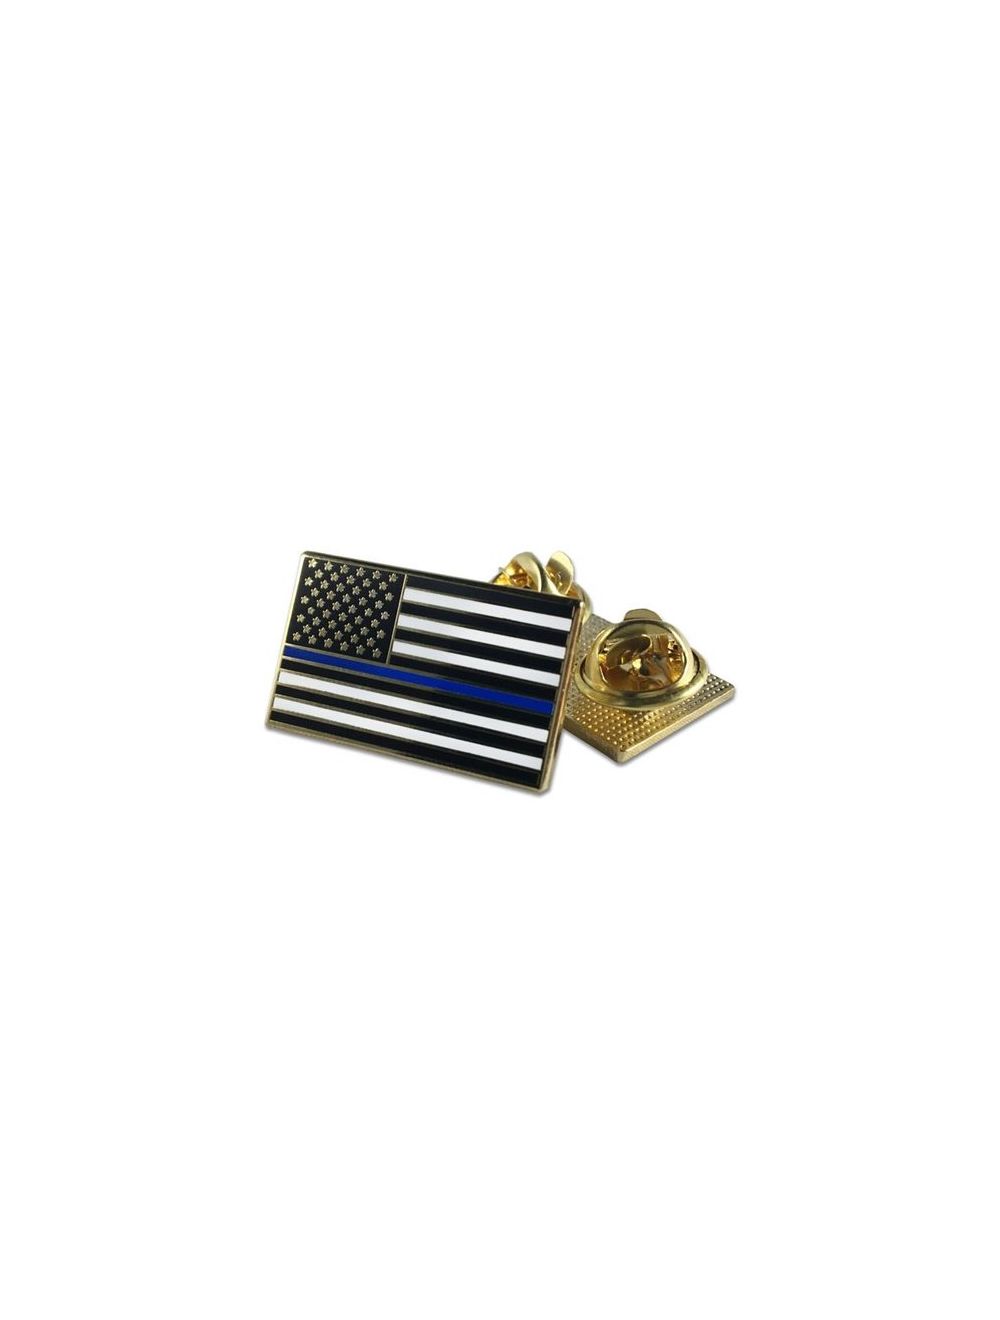 Classic Thin Blue Line American Flag Pin, Double Clutch Backing